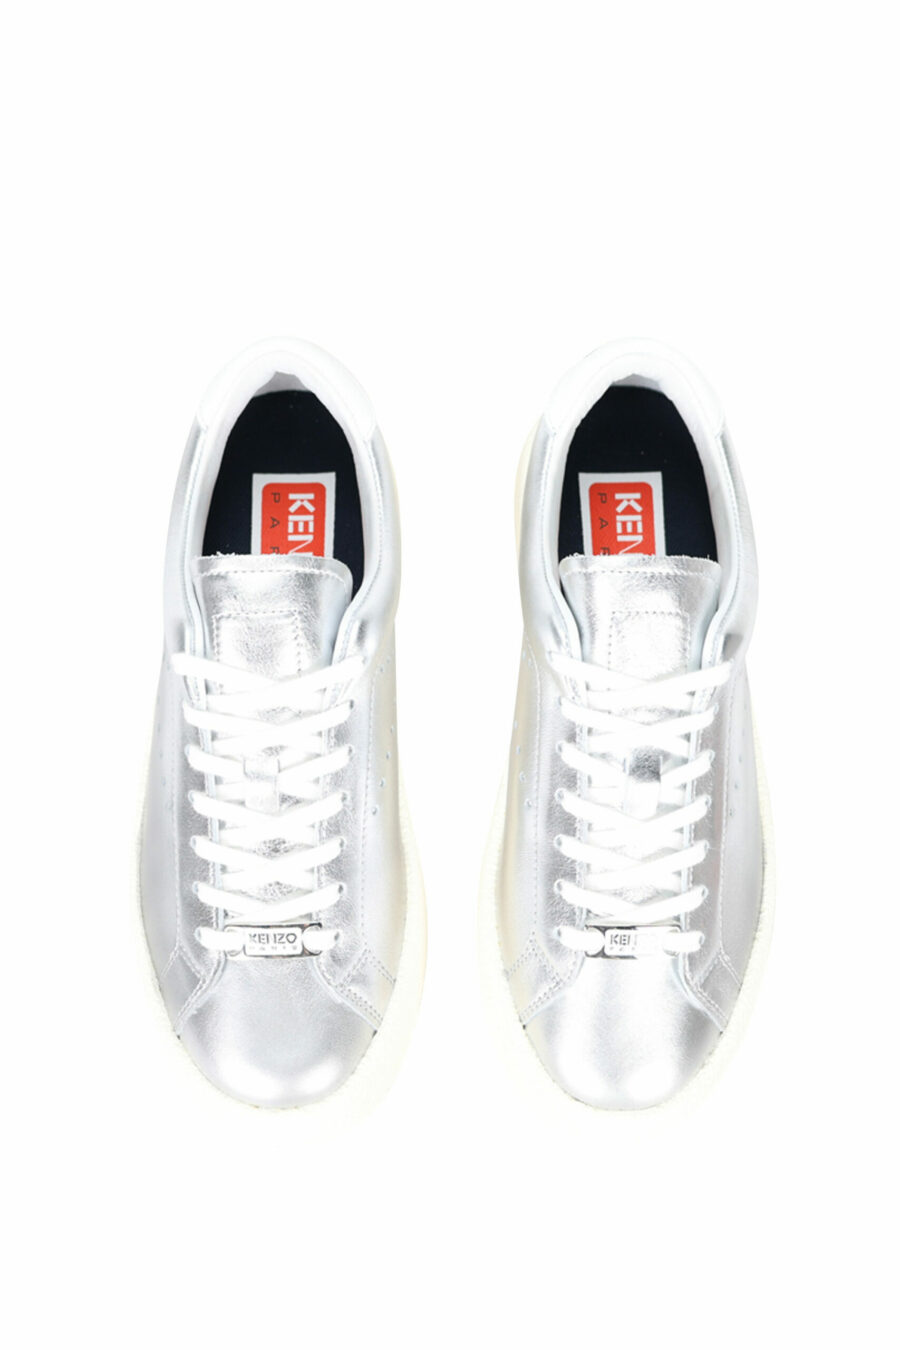 Silver shoes with black mini-logo - 3612230556461 4 scaled